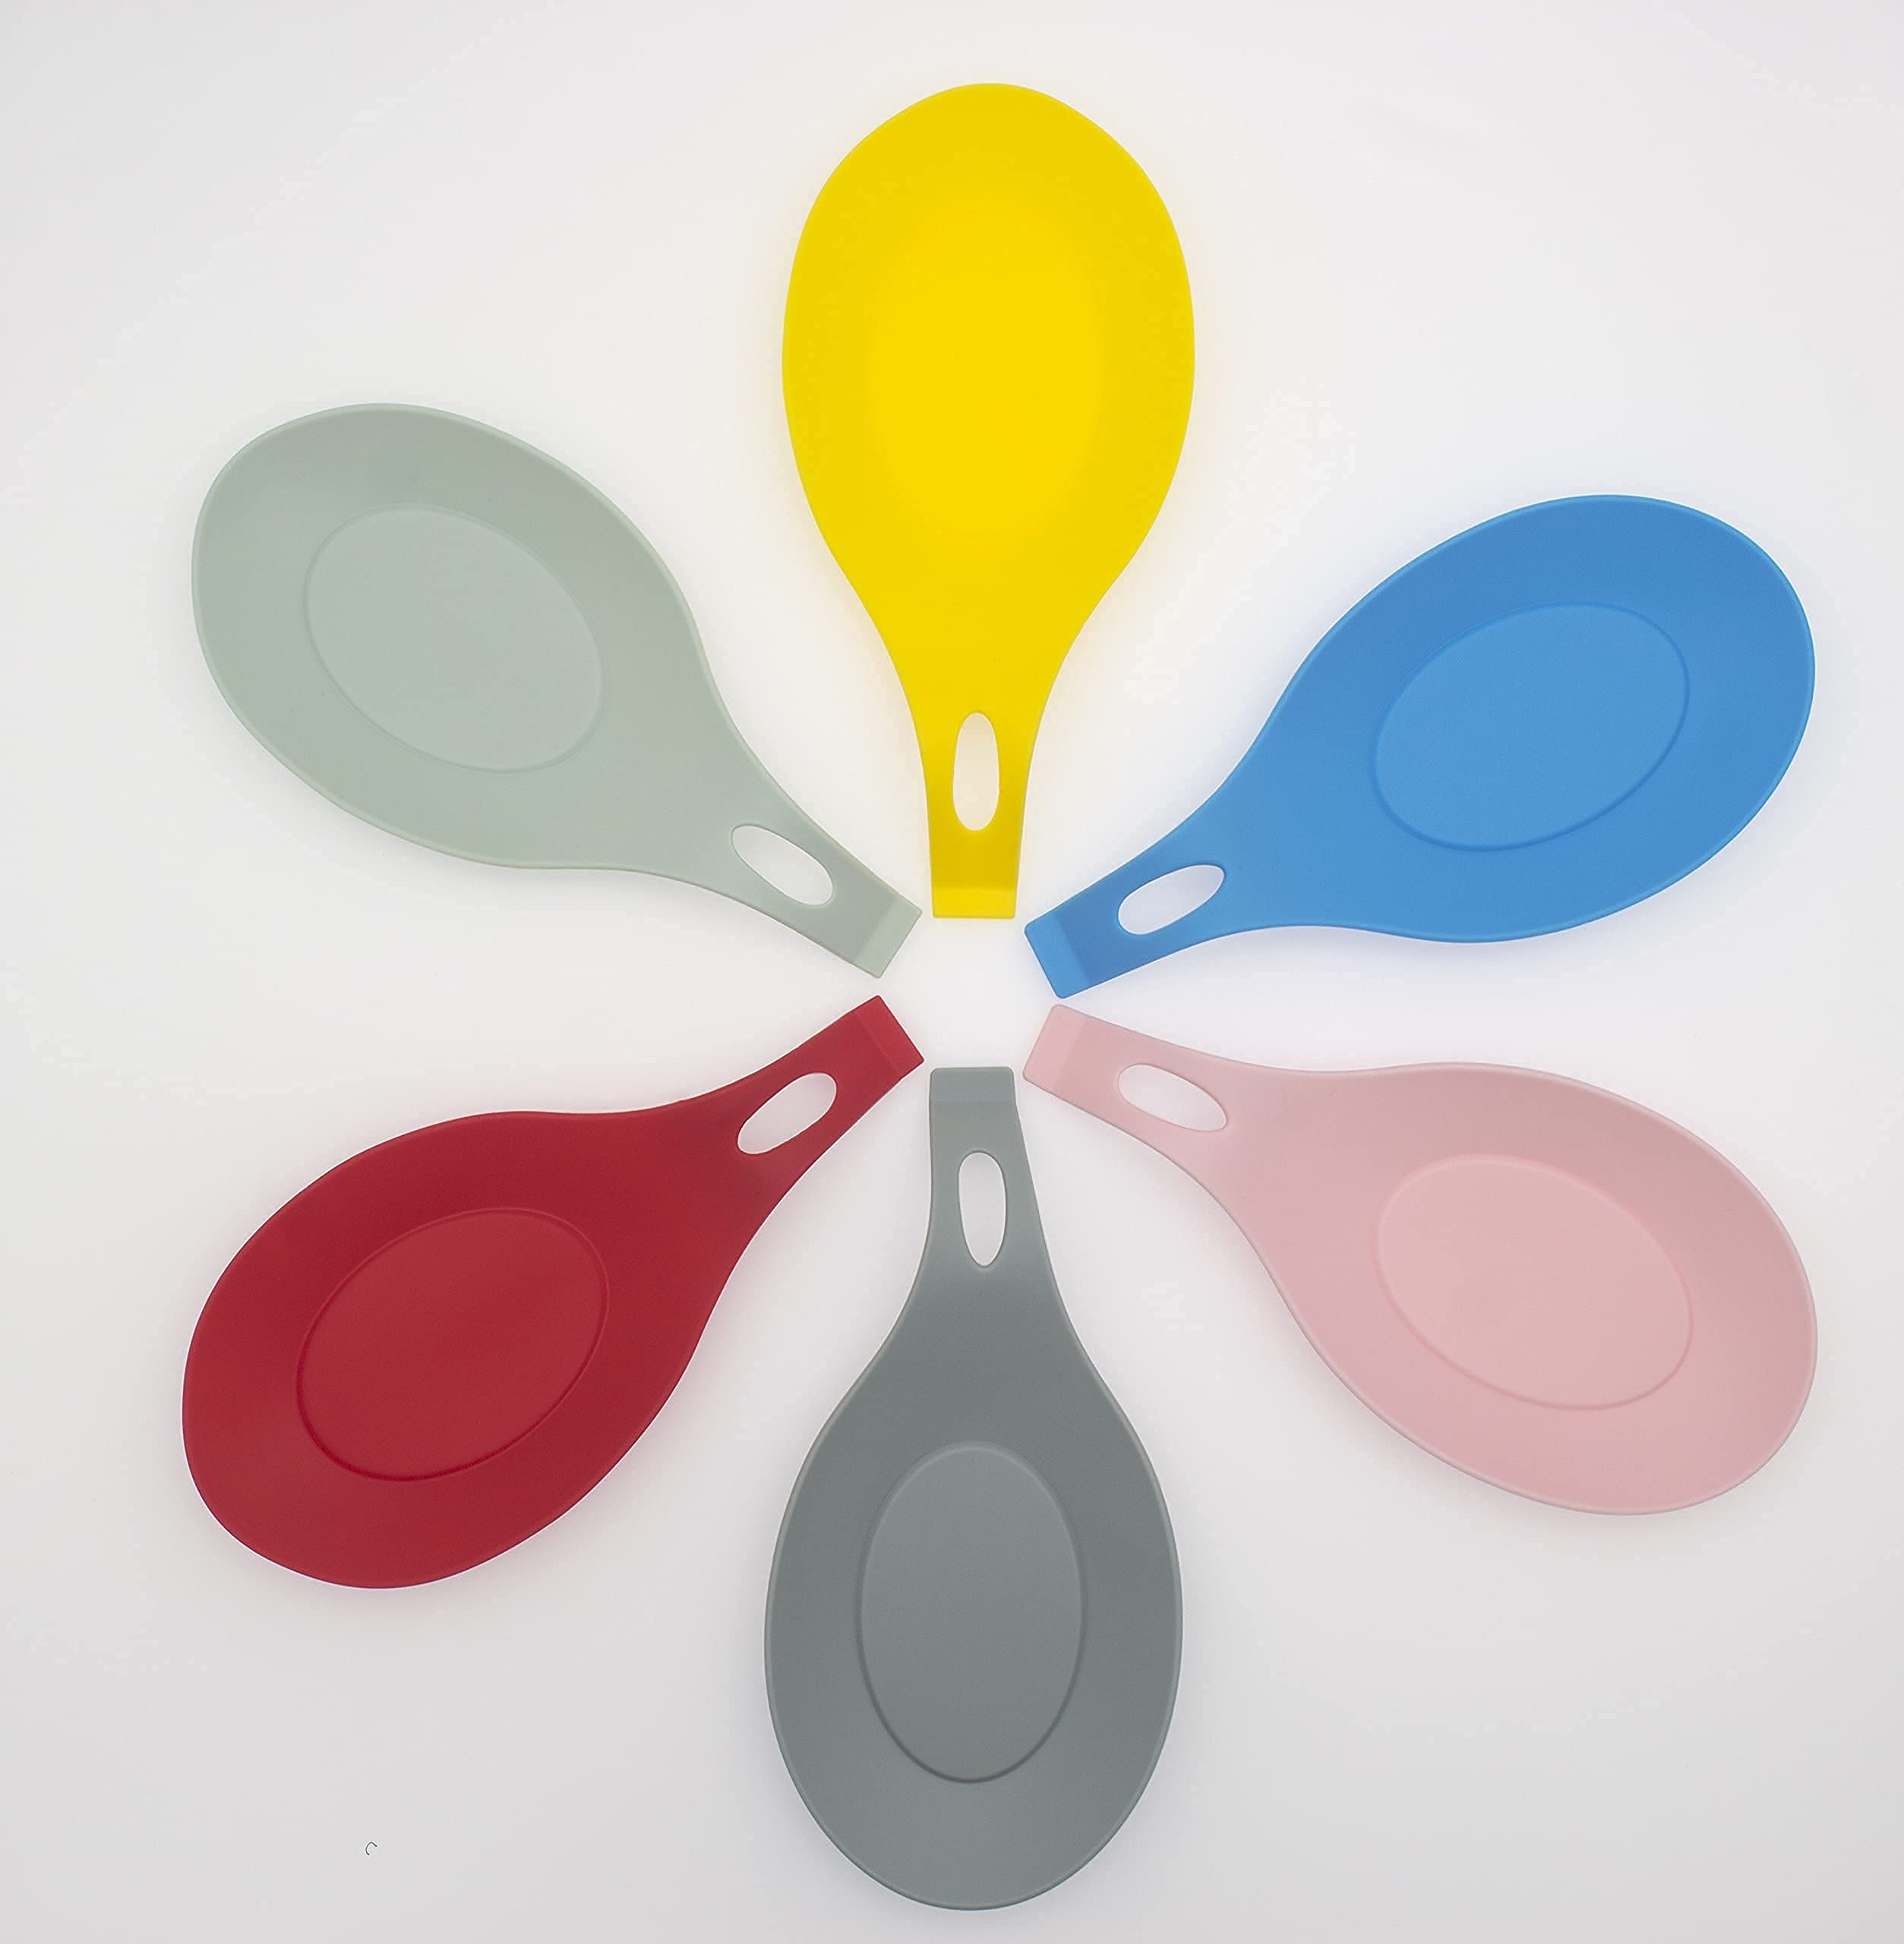 6Pcs Silicone Spoon Rest Counter Spatula Holder Spoon Rest For Kitchen Counter(Mixed Color)